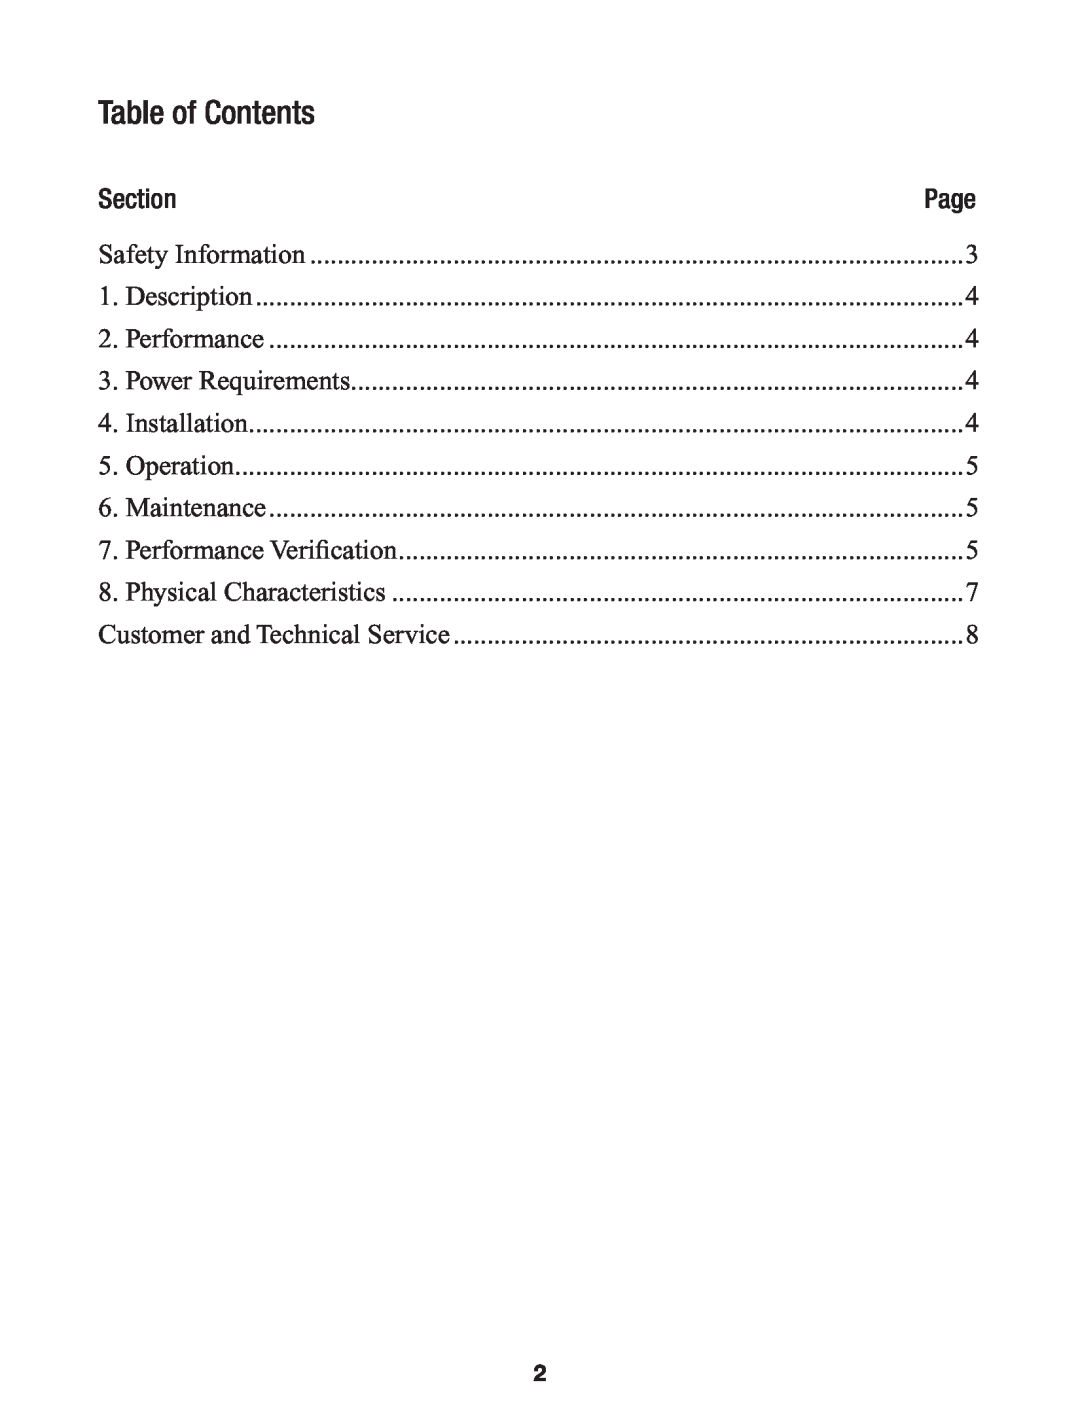 3M 963E manual Table of Contents, Section 